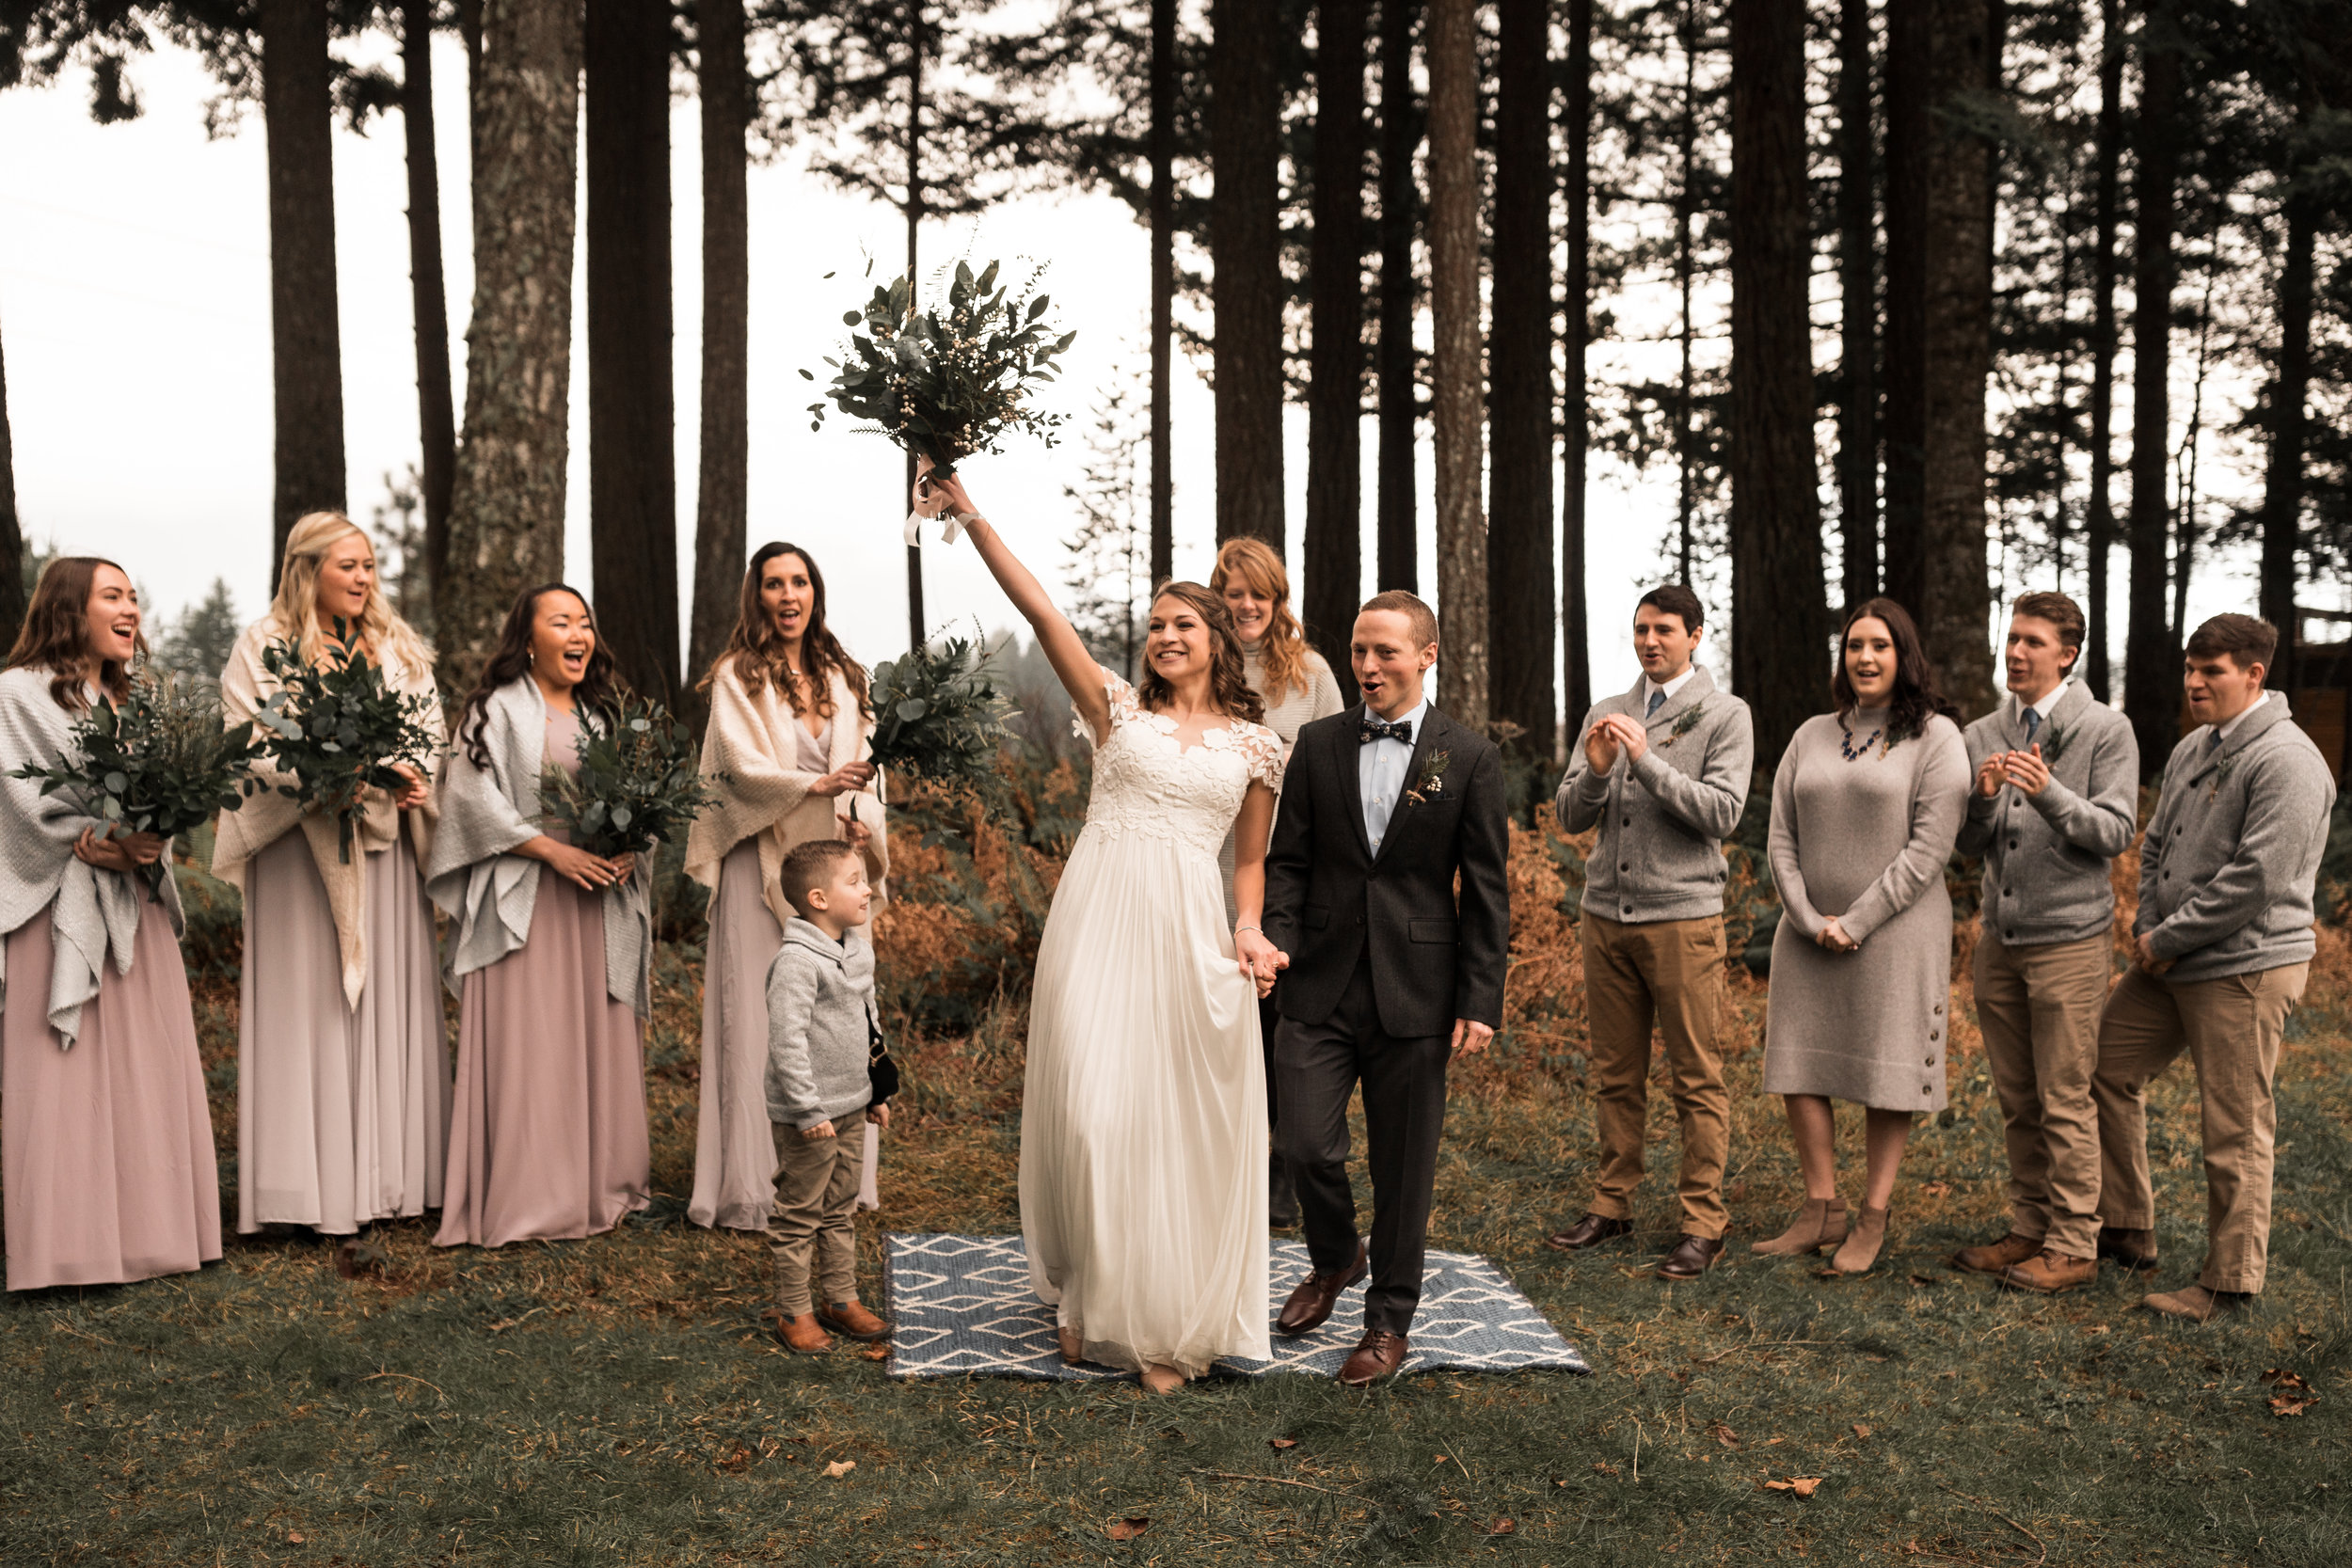 Airbnb Wedding in the Columbia River Gorge | Between the Pine Photography